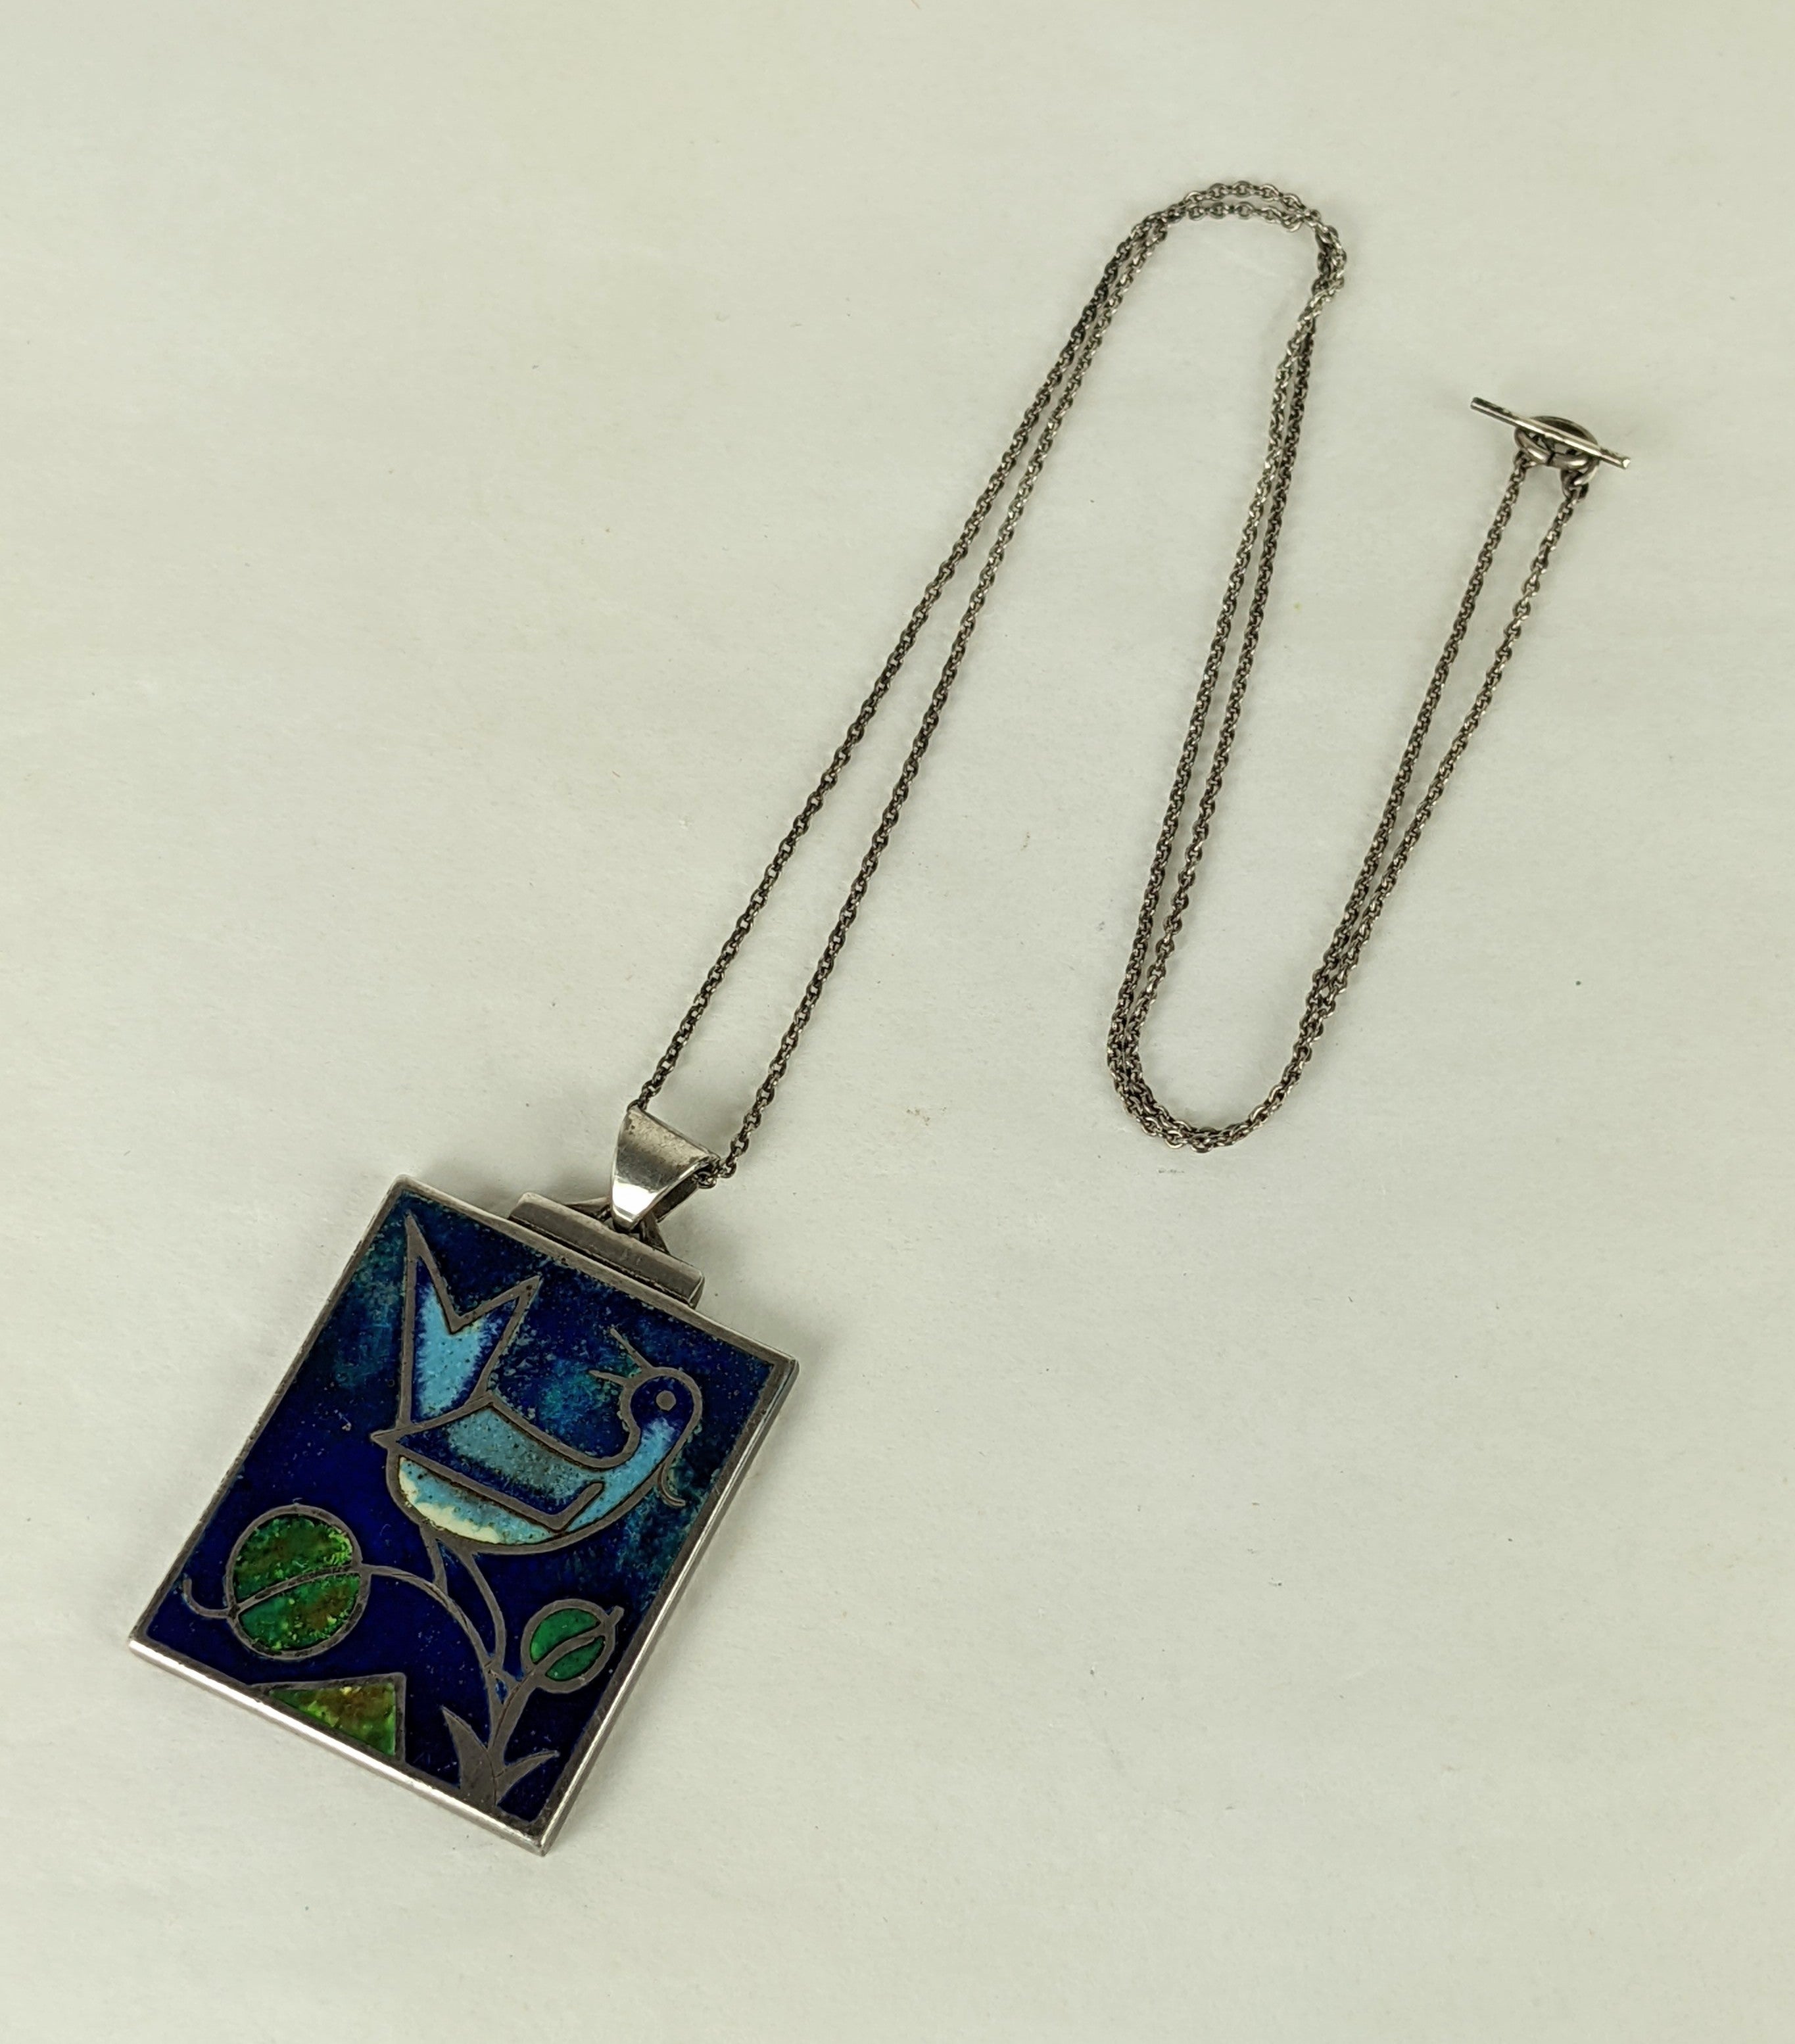 Elegant Modernist Enamel Pendant from Germany circa 1940's. Charming matte enamel bird on branch in cobalt, sky blue and green in a stepped Deco sterling setting with original 